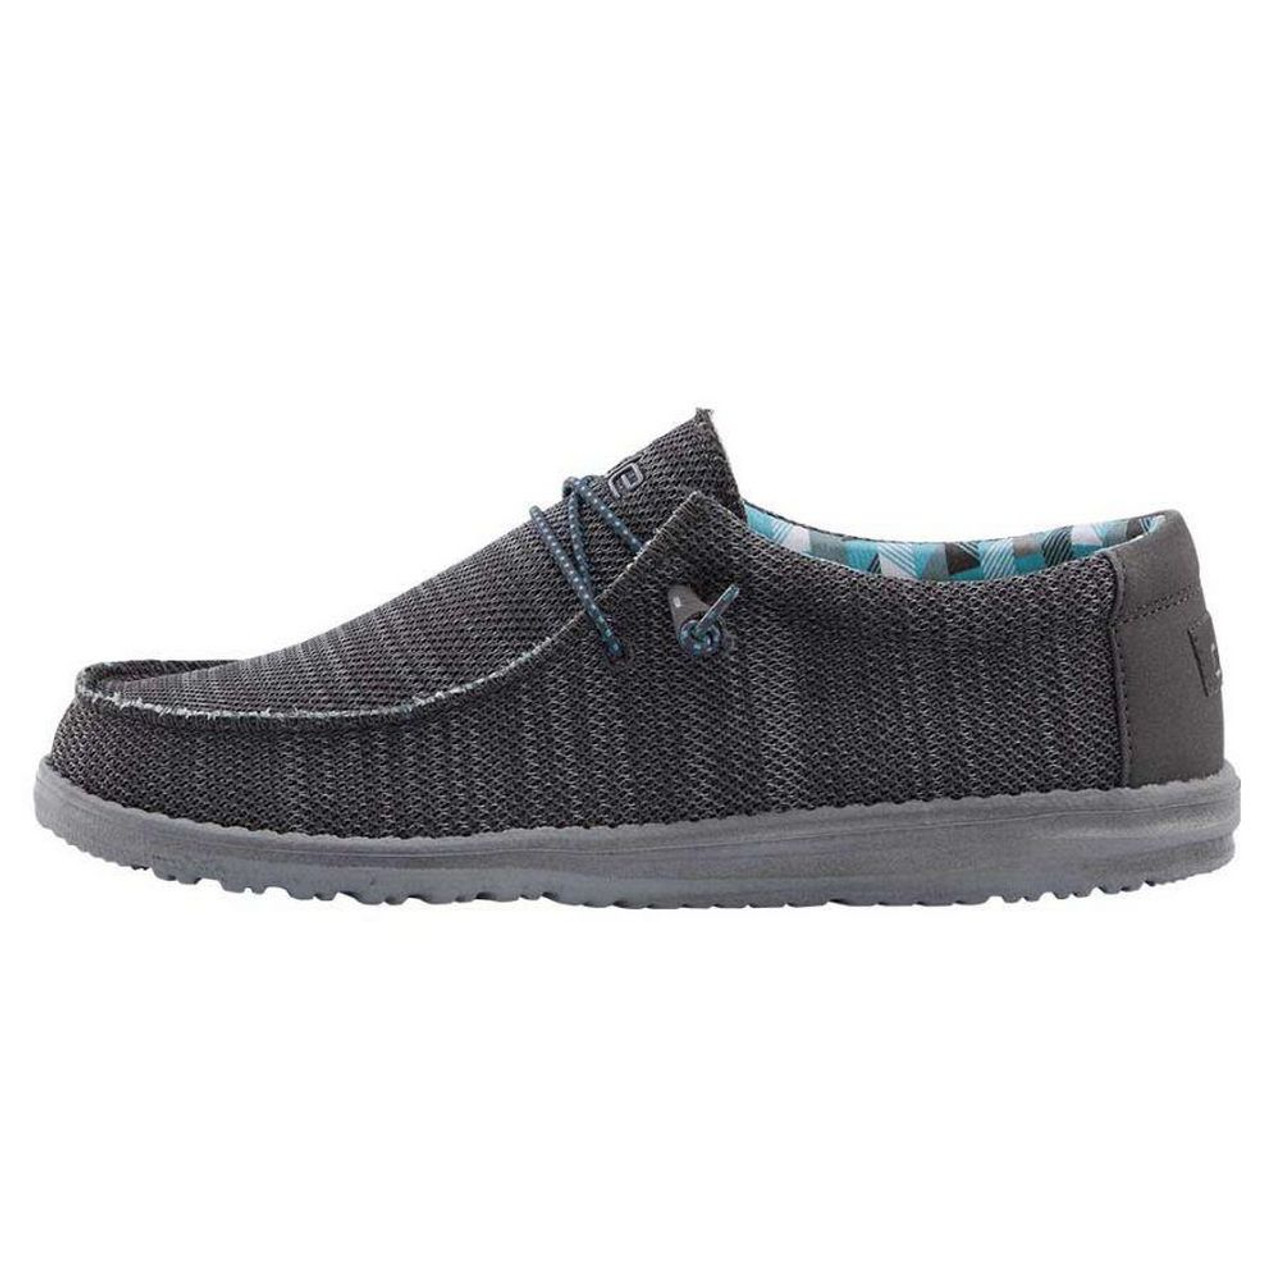 Hey Dude Wally Sox Classic Men's Knit Slip On Loafer Shoes